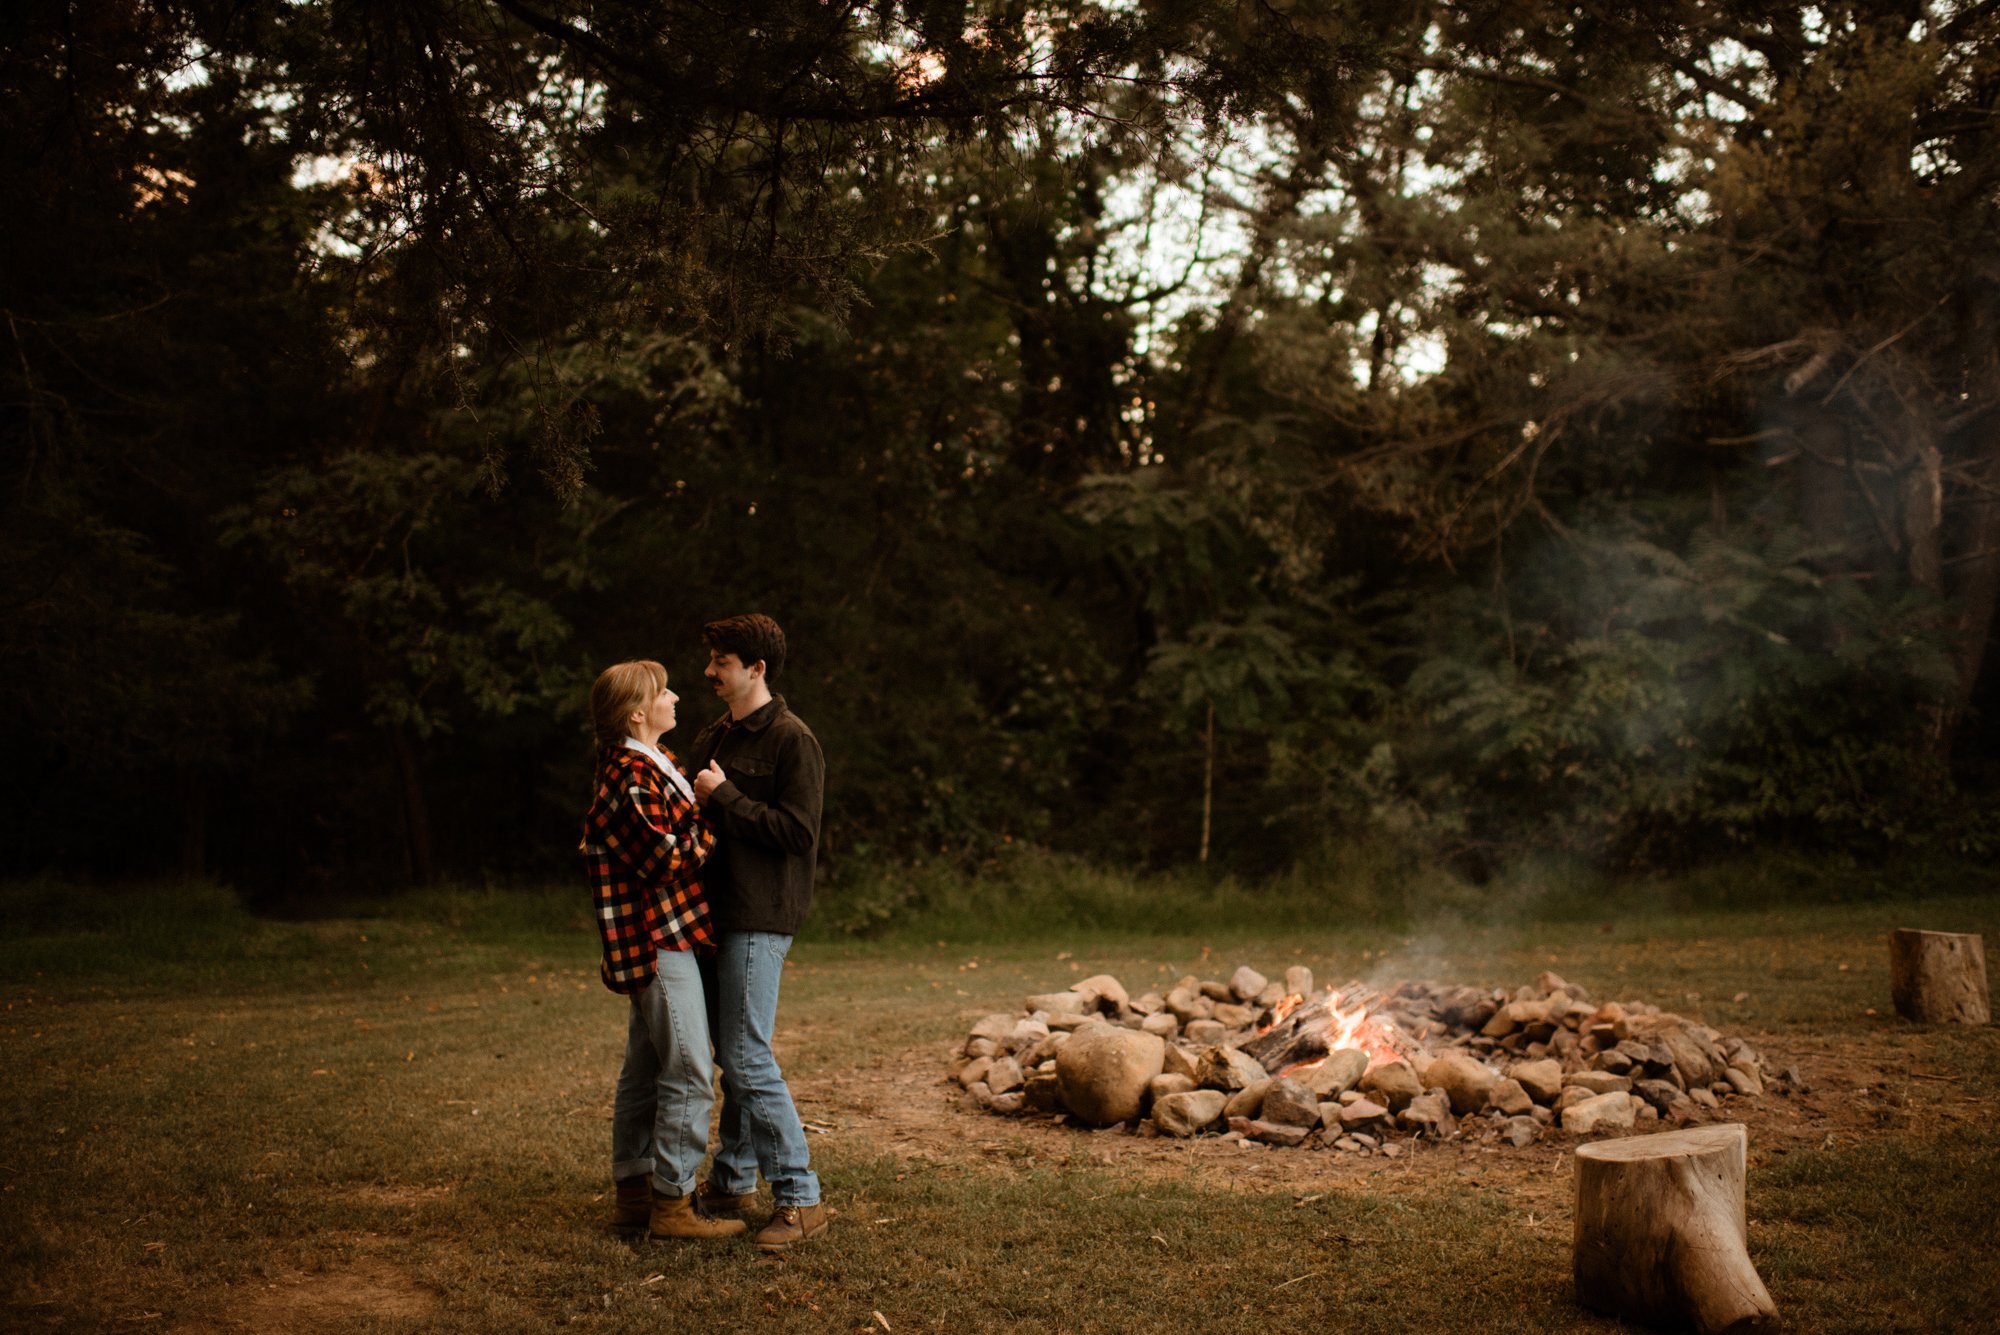 Sill and Glade Cabin Elopement in Virginia - Mountain Airbnb Elopement - White Sails Creative - Blue Ridge Mountains Elopement Cabin Inspiration_49.jpg